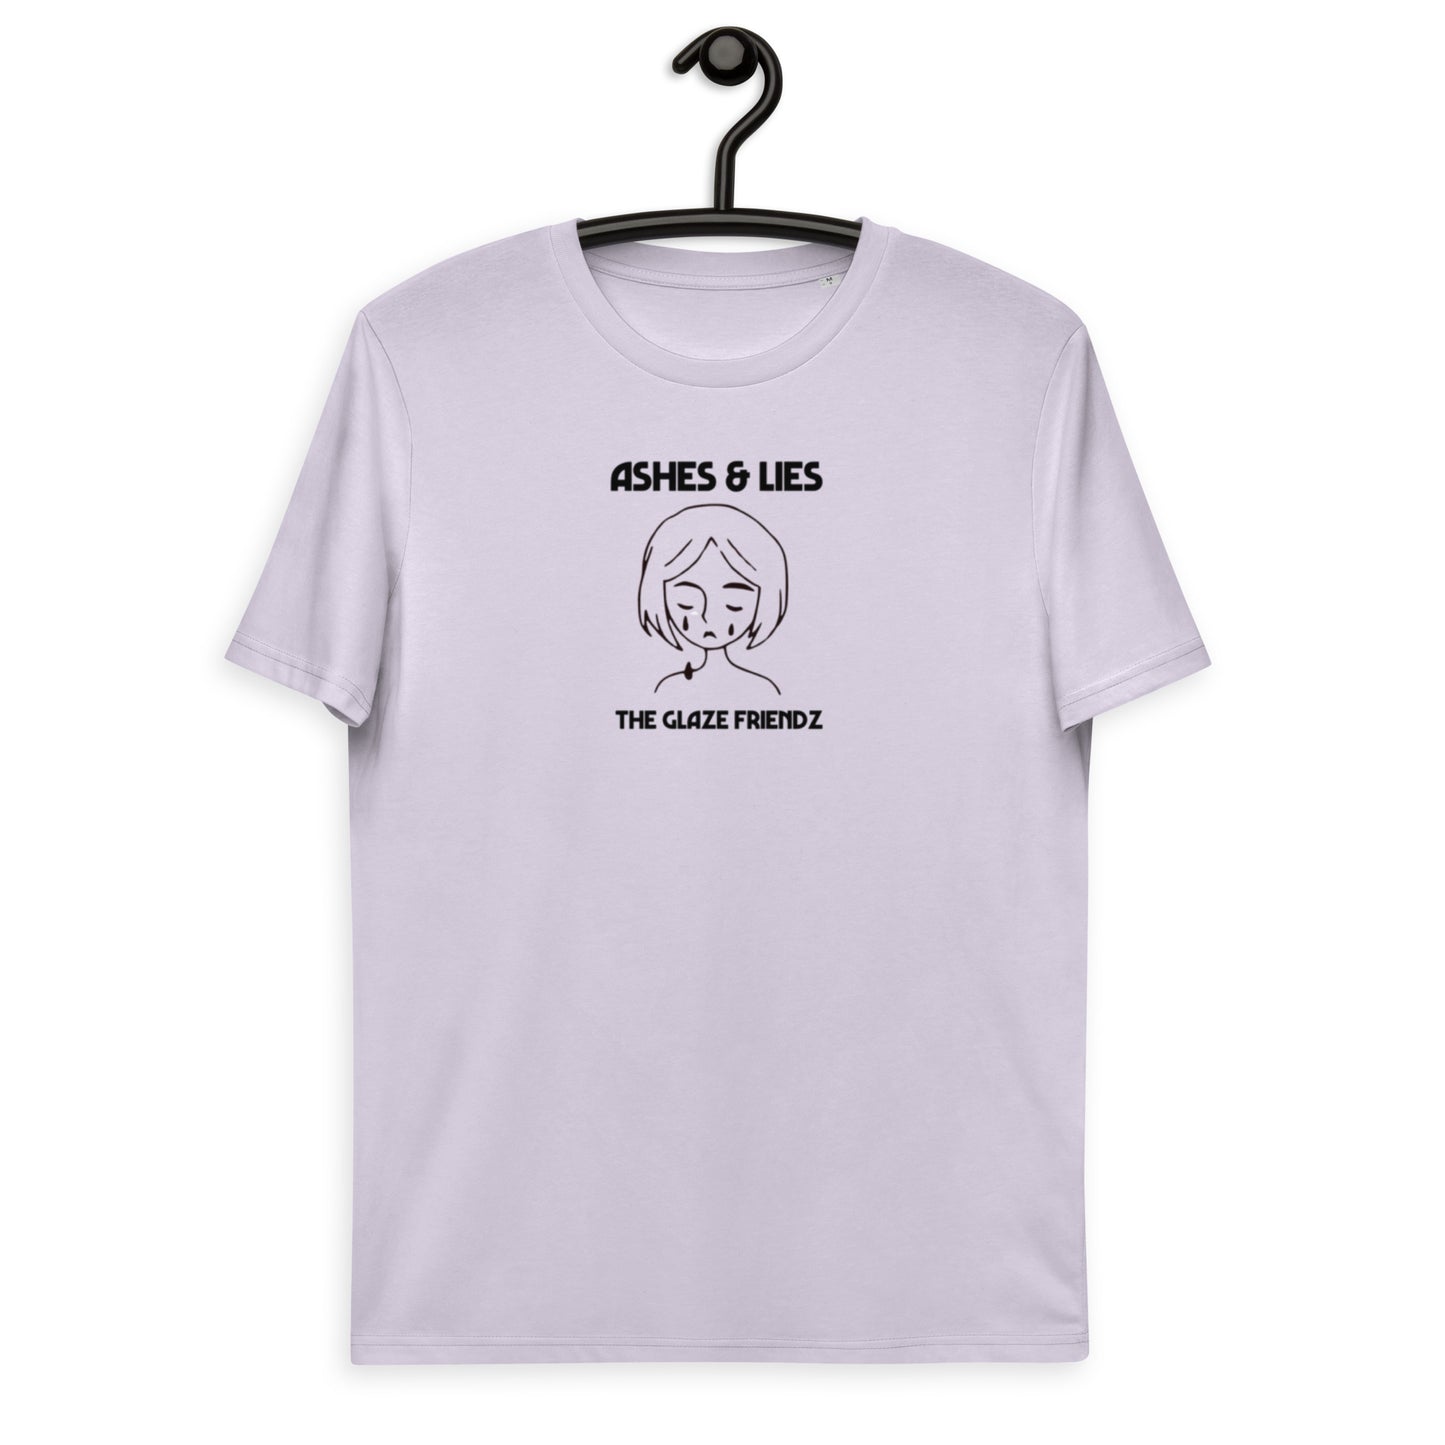 ASHES AND LIES Premium T-Shirt Limited Edition